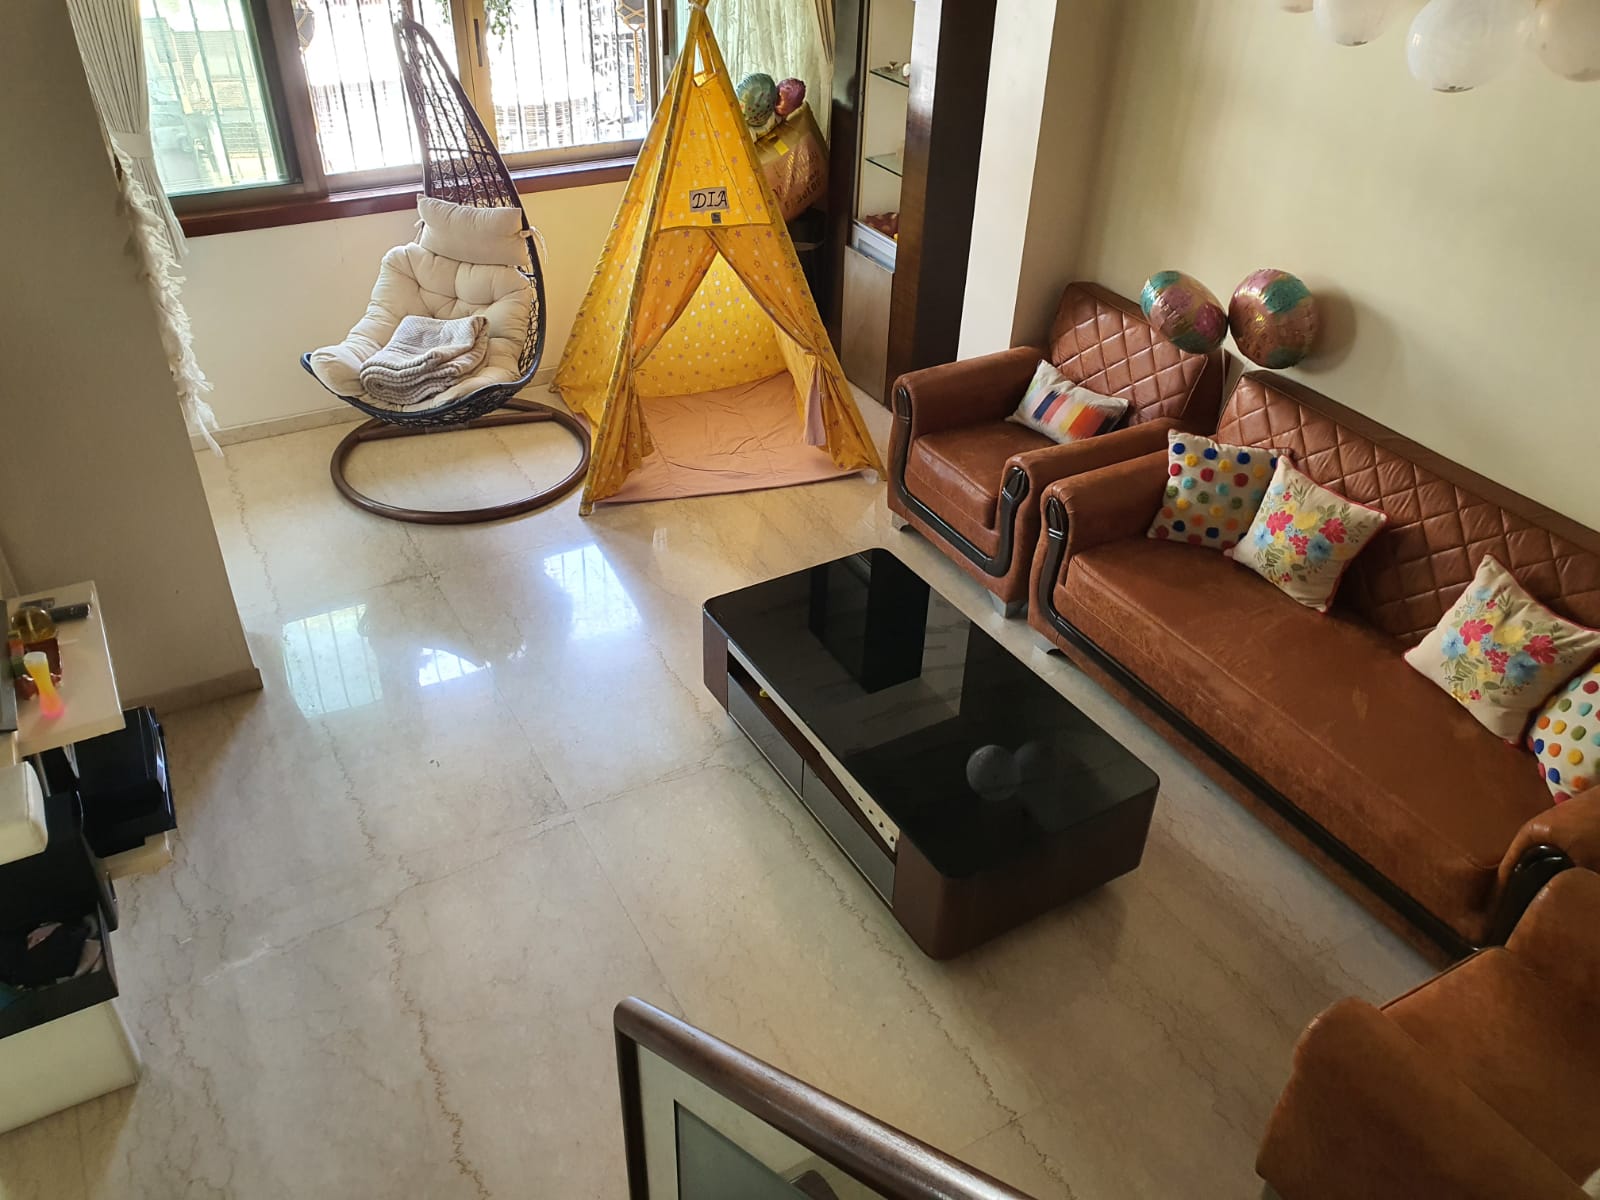 2 BHK Fully Furnished